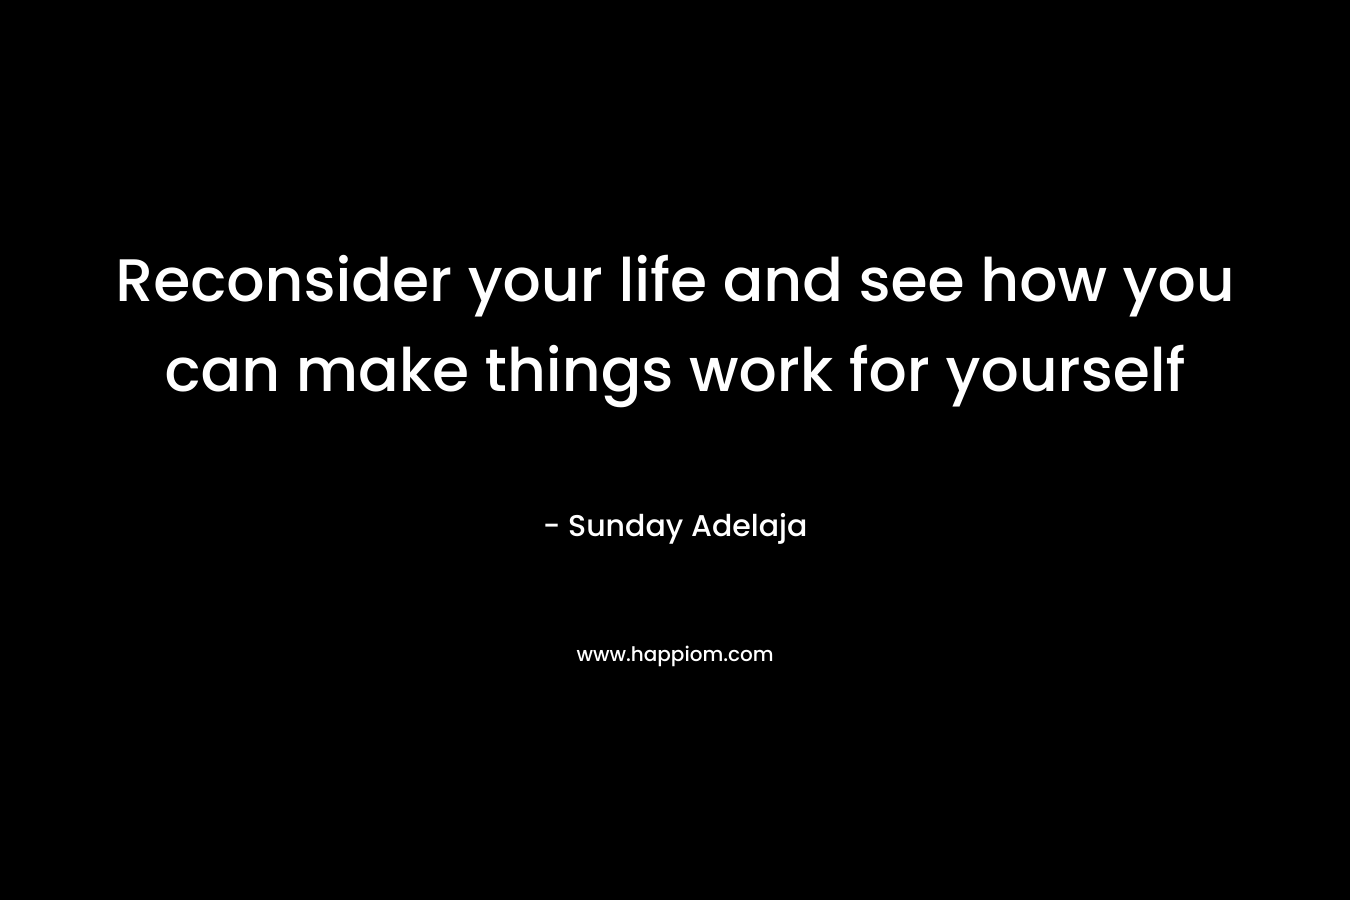 Reconsider your life and see how you can make things work for yourself